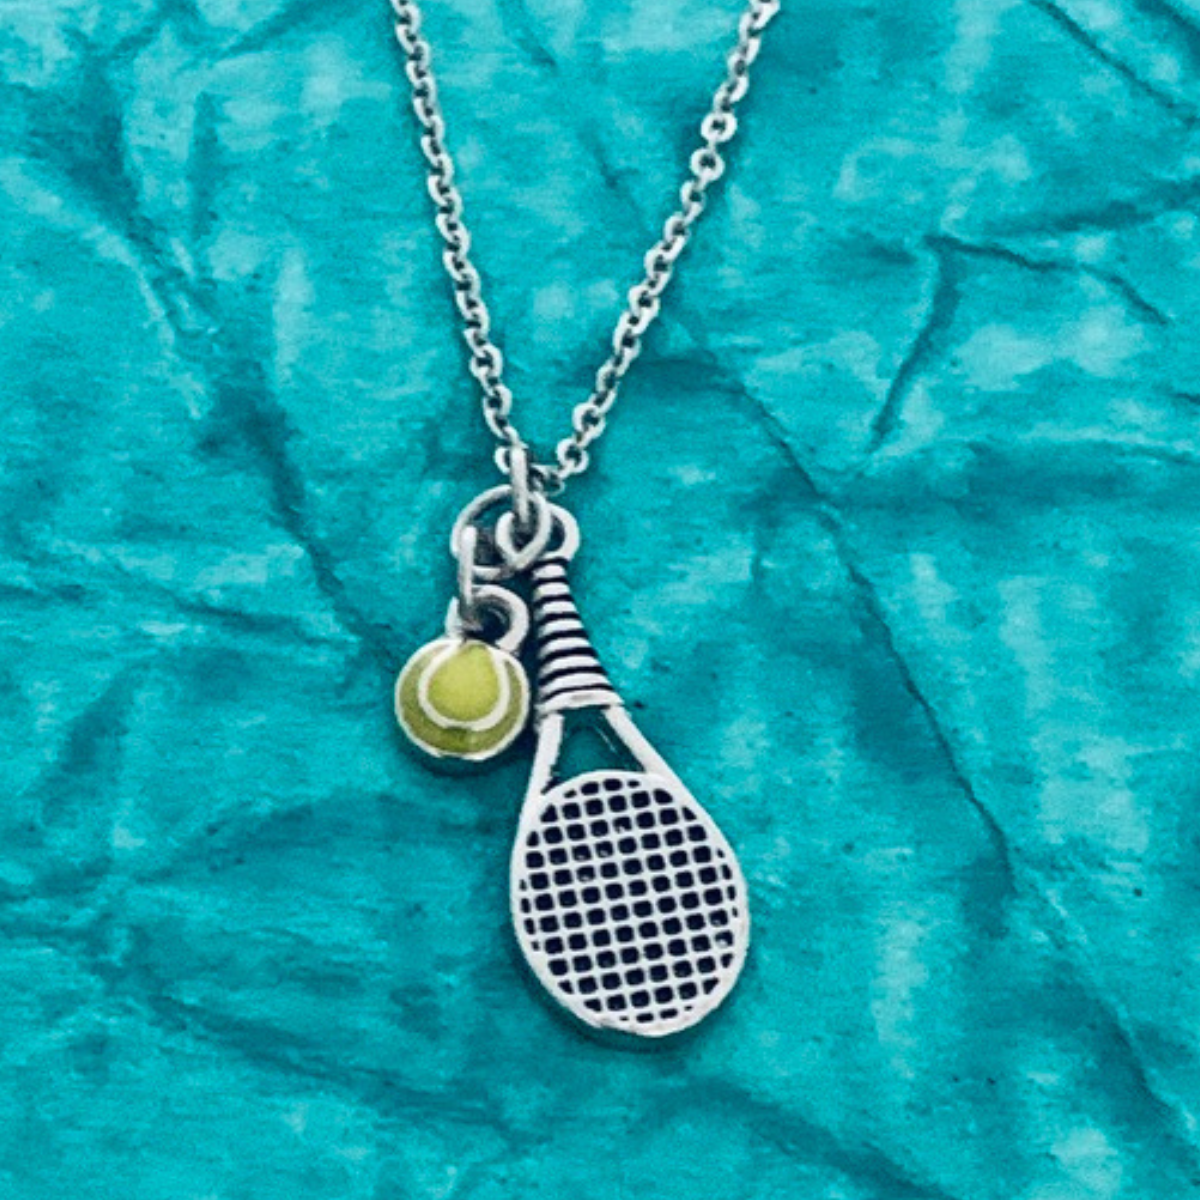 Tennis Racket Charm Necklace